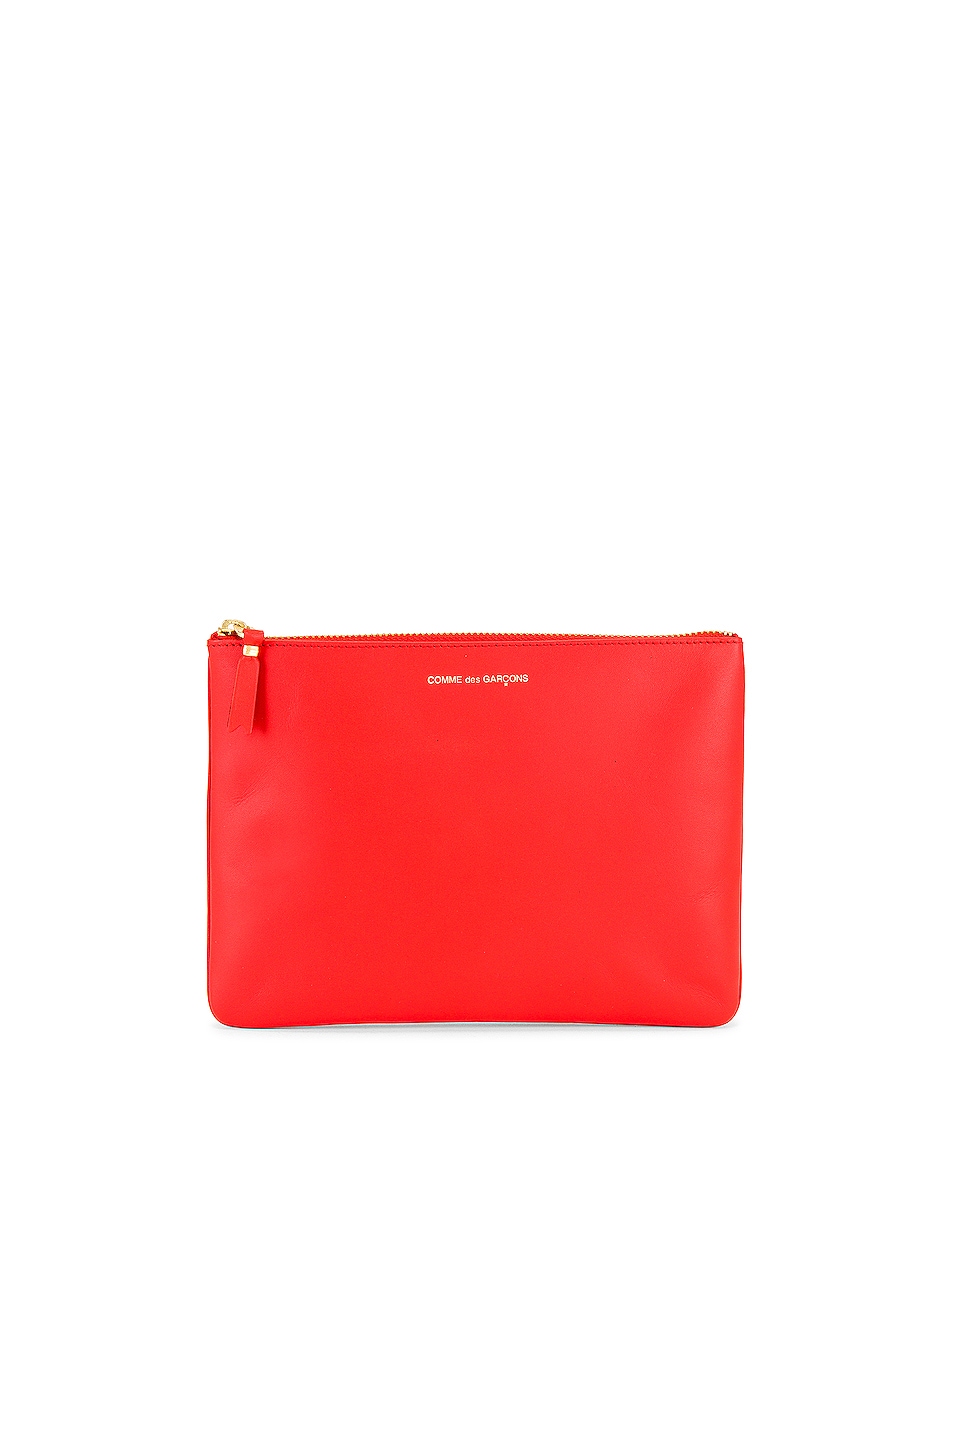 Classic Leather Pouch in Orange